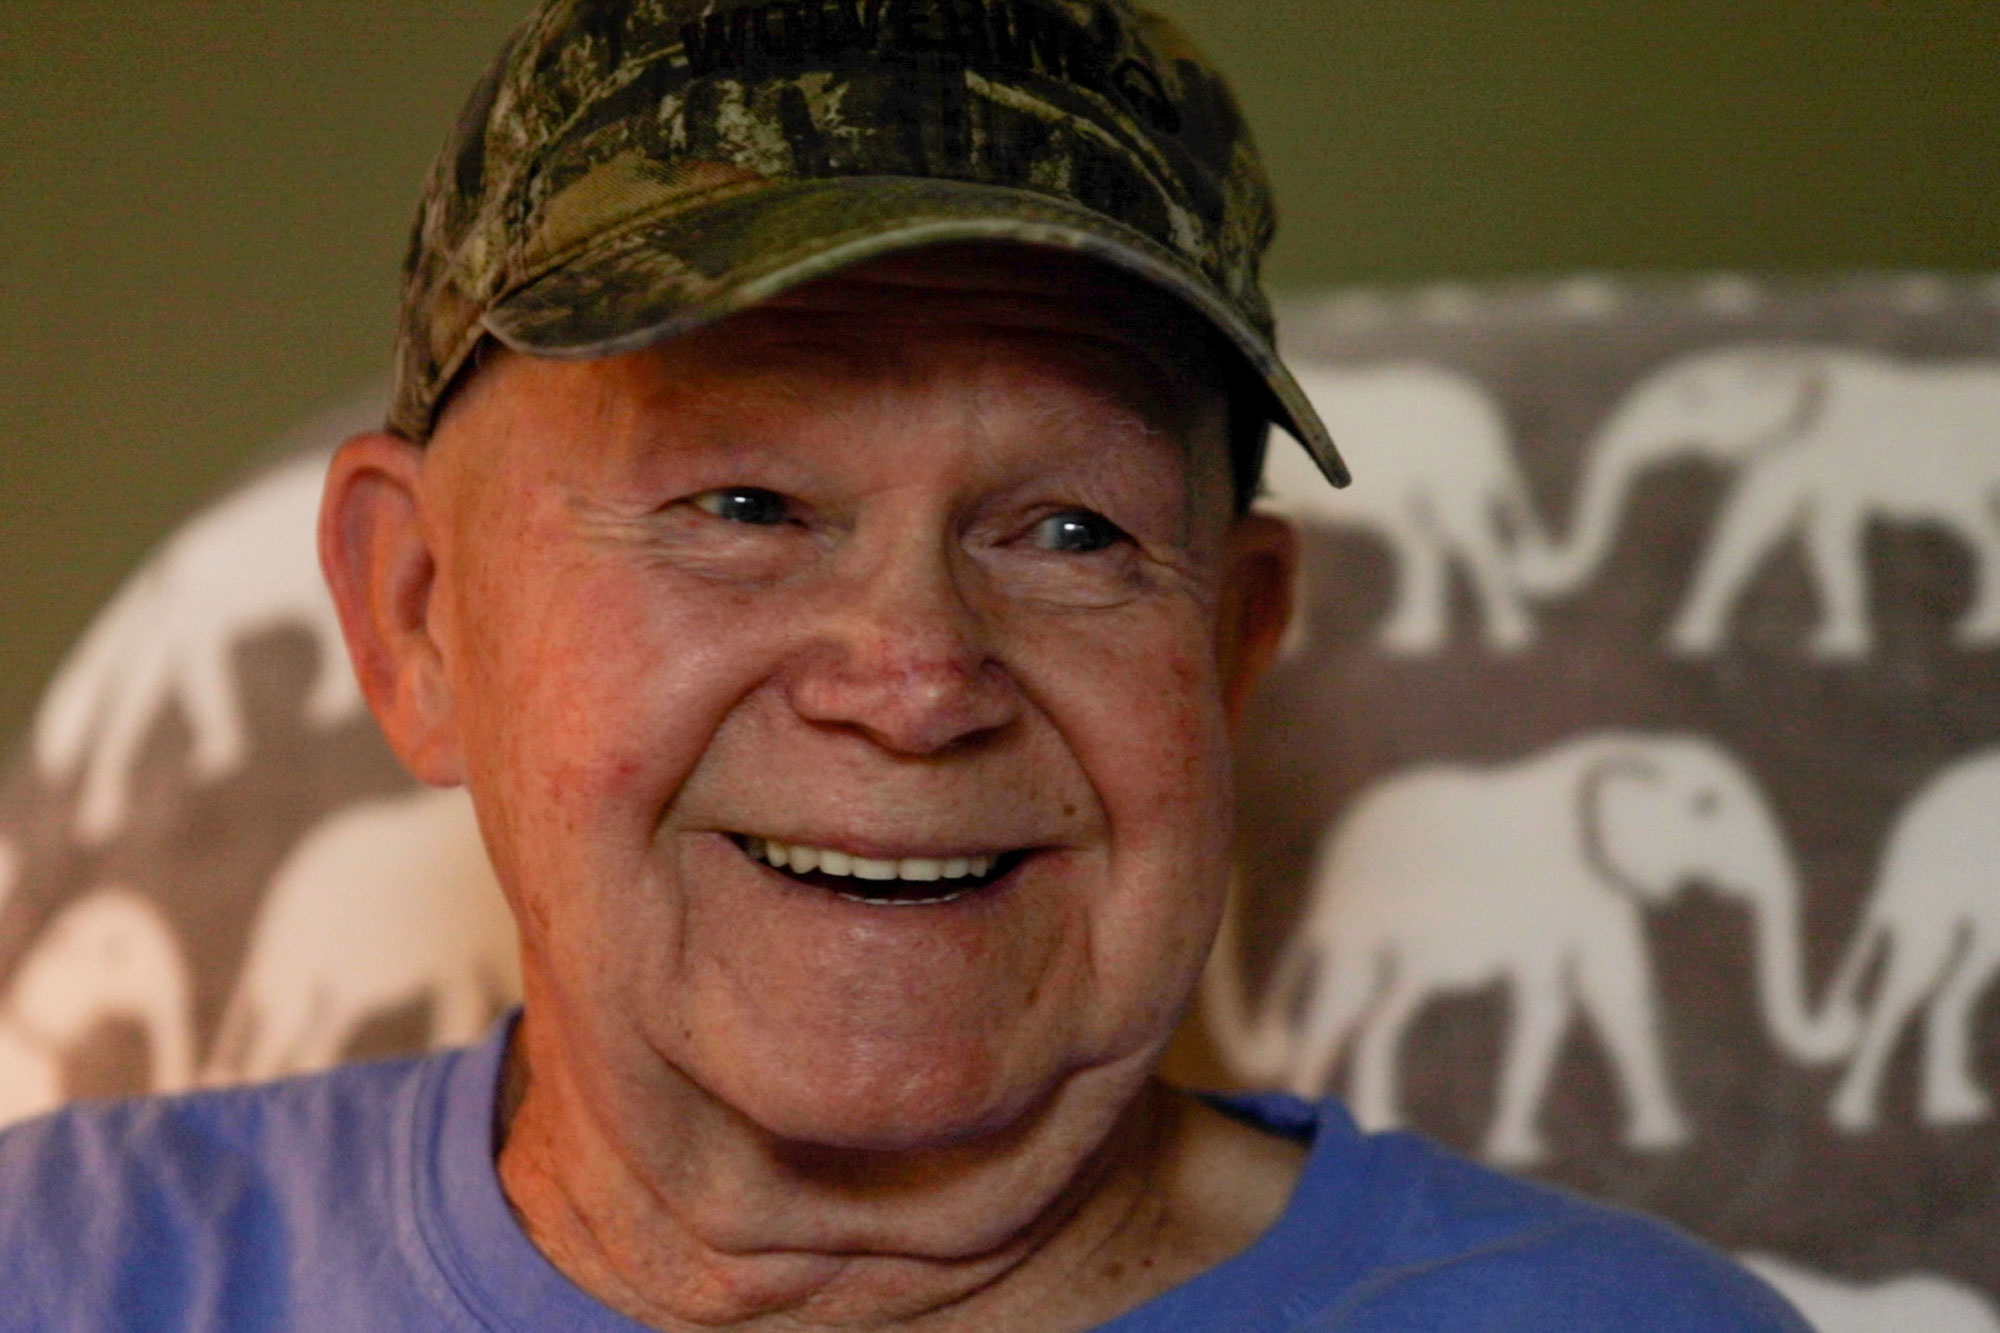 An older man with a camo hat on smiles at the camera